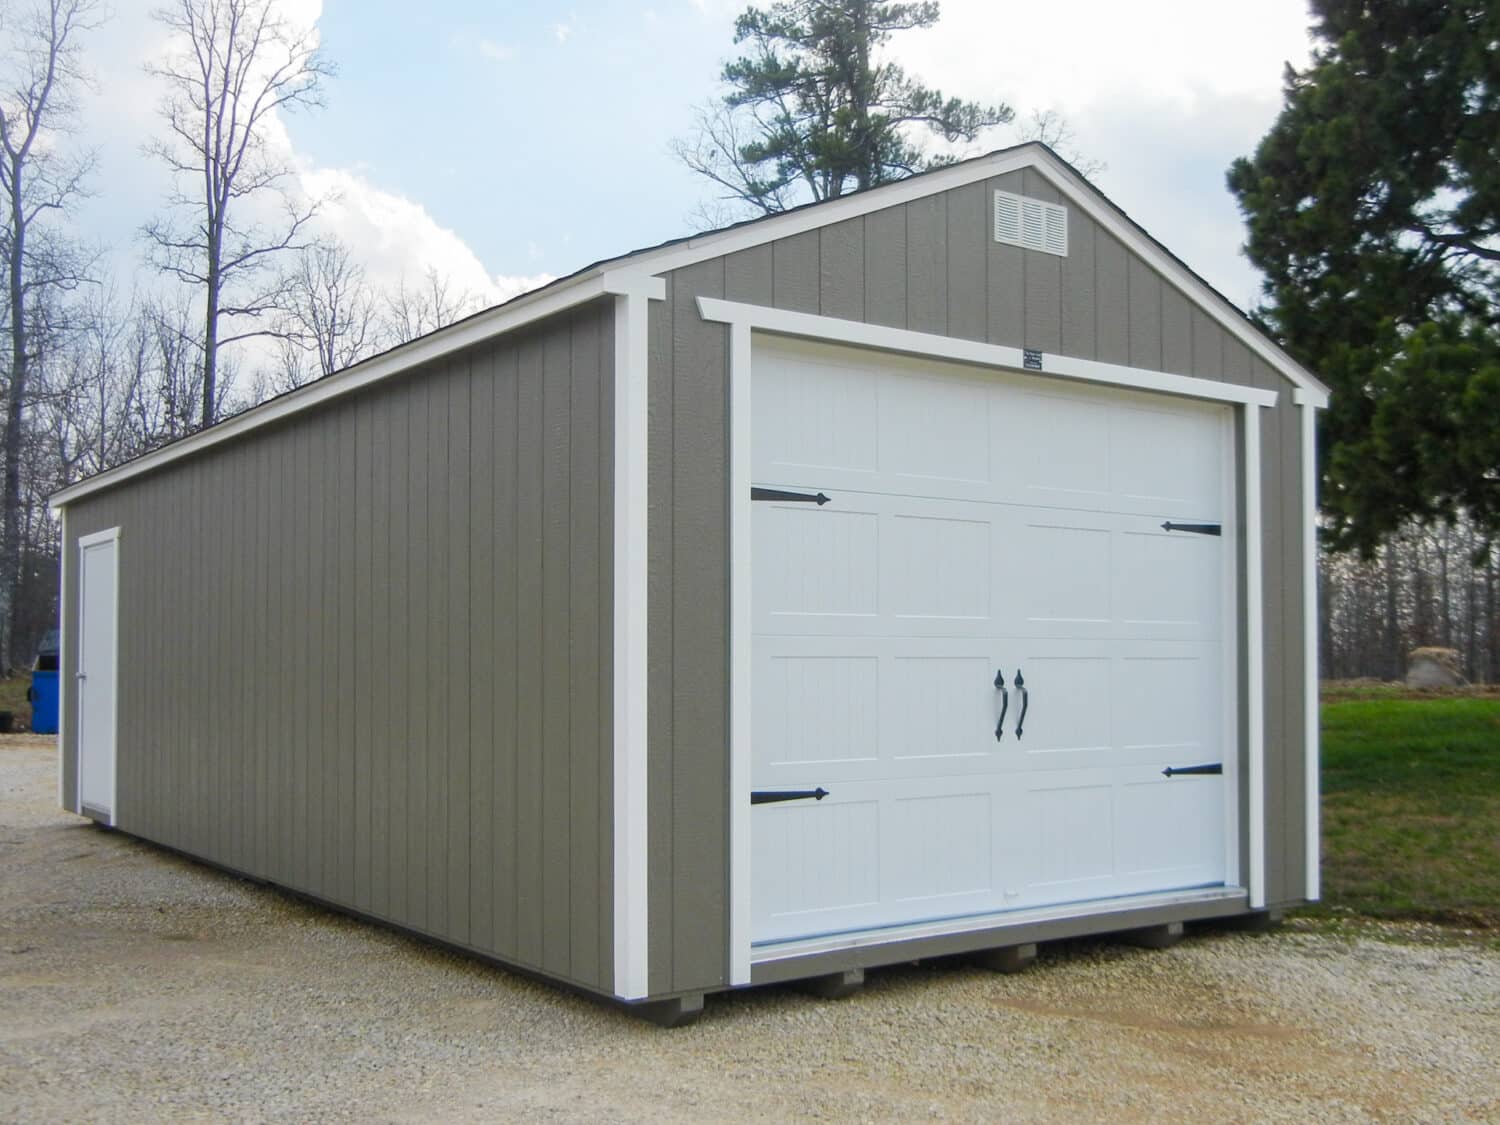 prebuilt portable garages with roll doors in lincoln mo-1